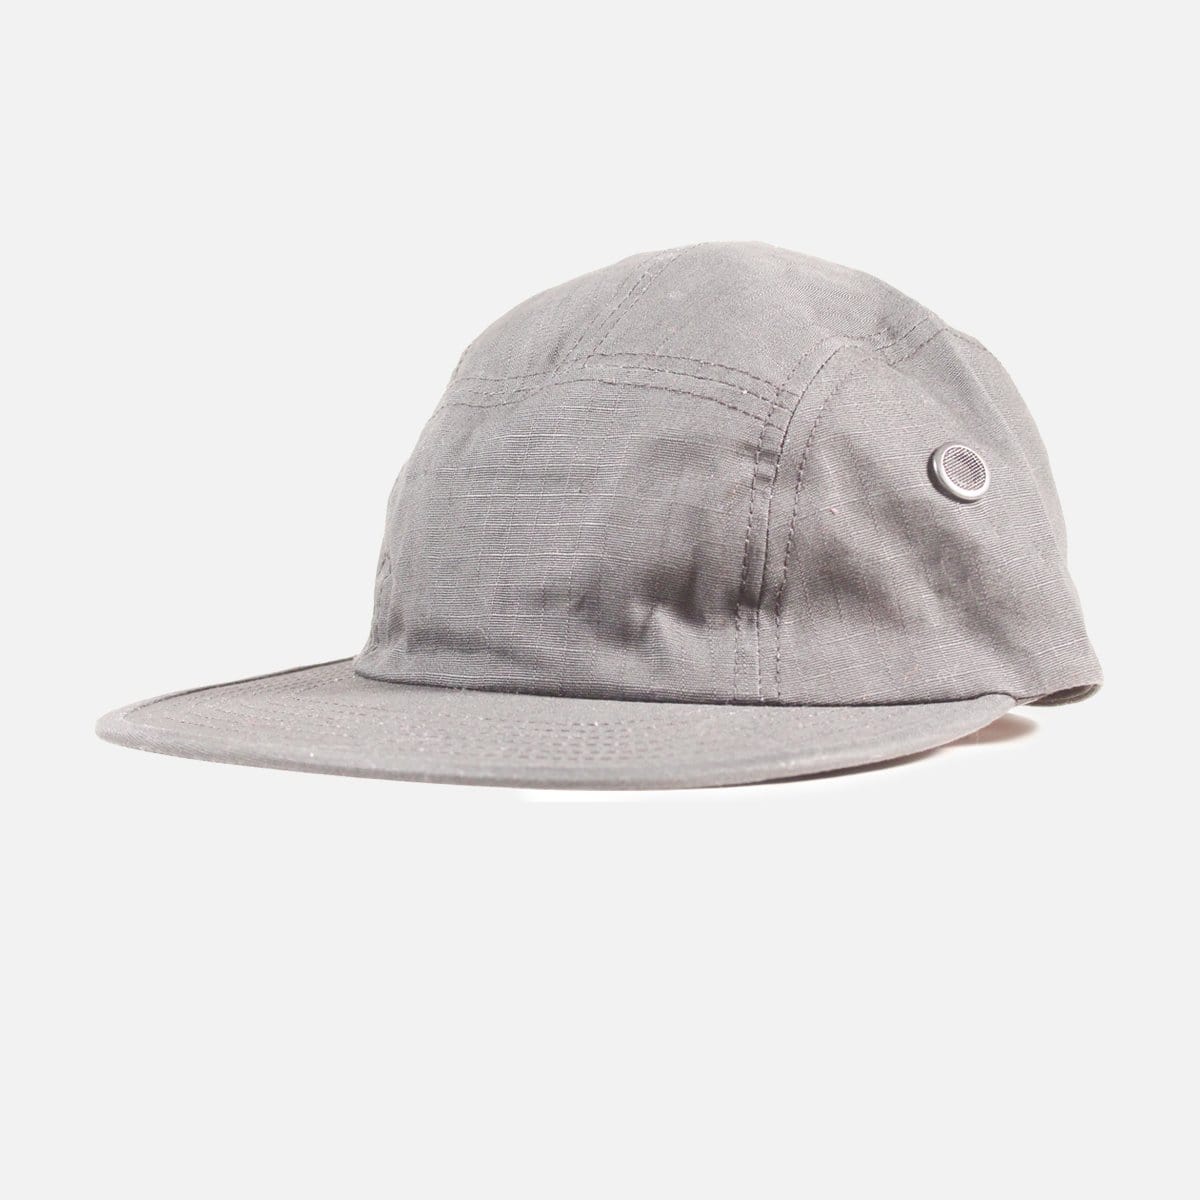 RUVilla.com is where to buy the Rothco 5 Panel Camp Cap (Black or Grey)!